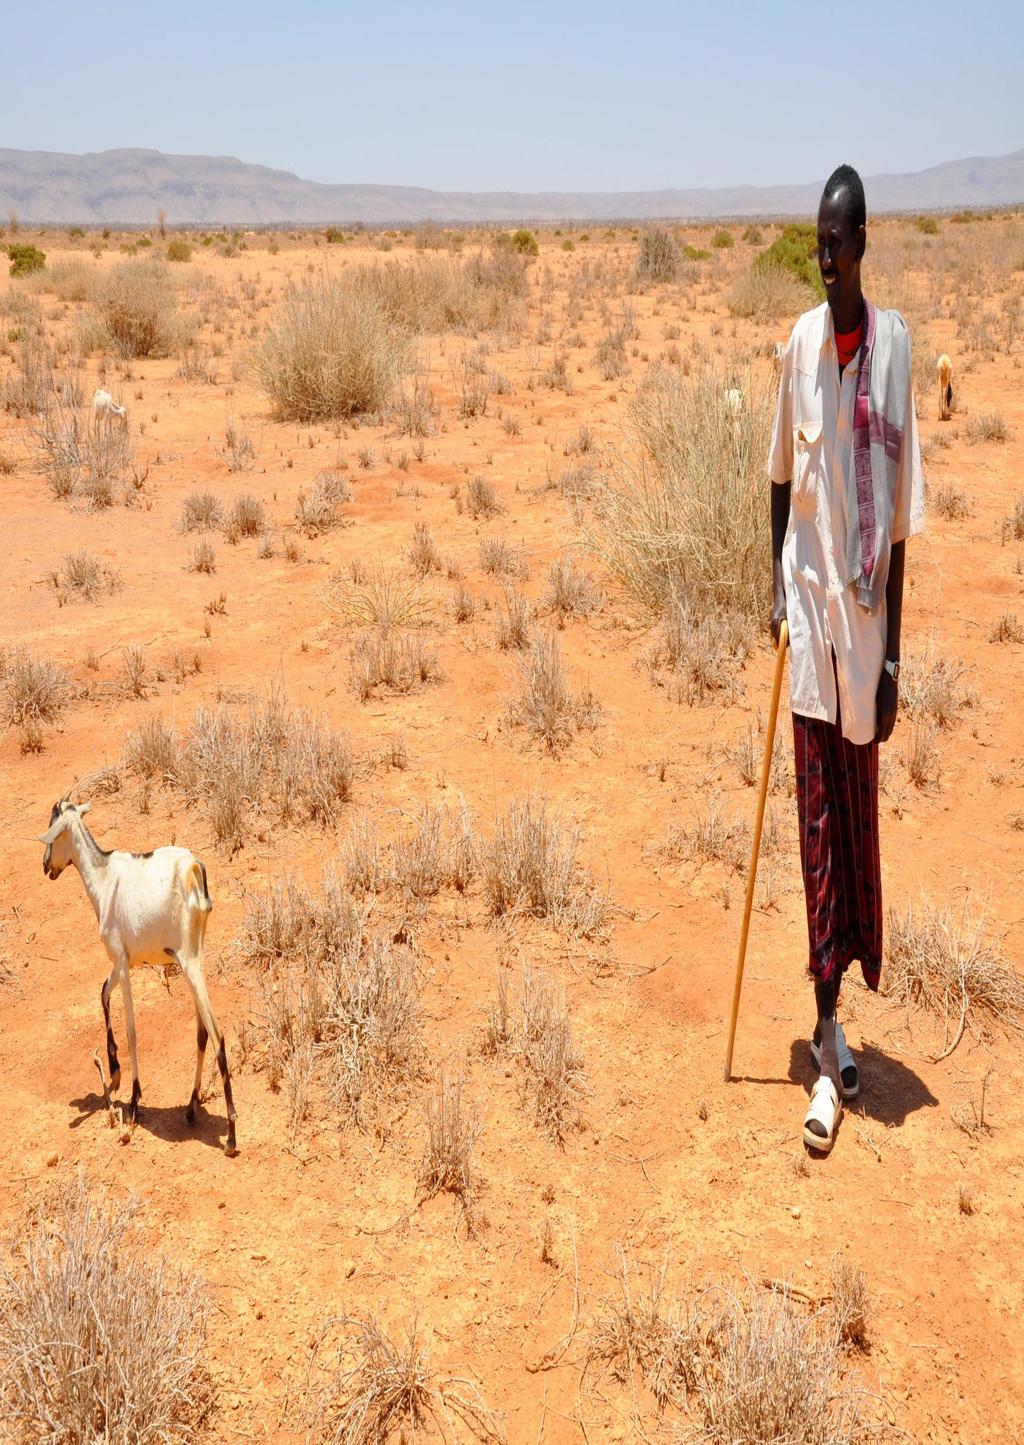 Drought in Somalia, Horn of Africa, July 2011 CHAPTER 4